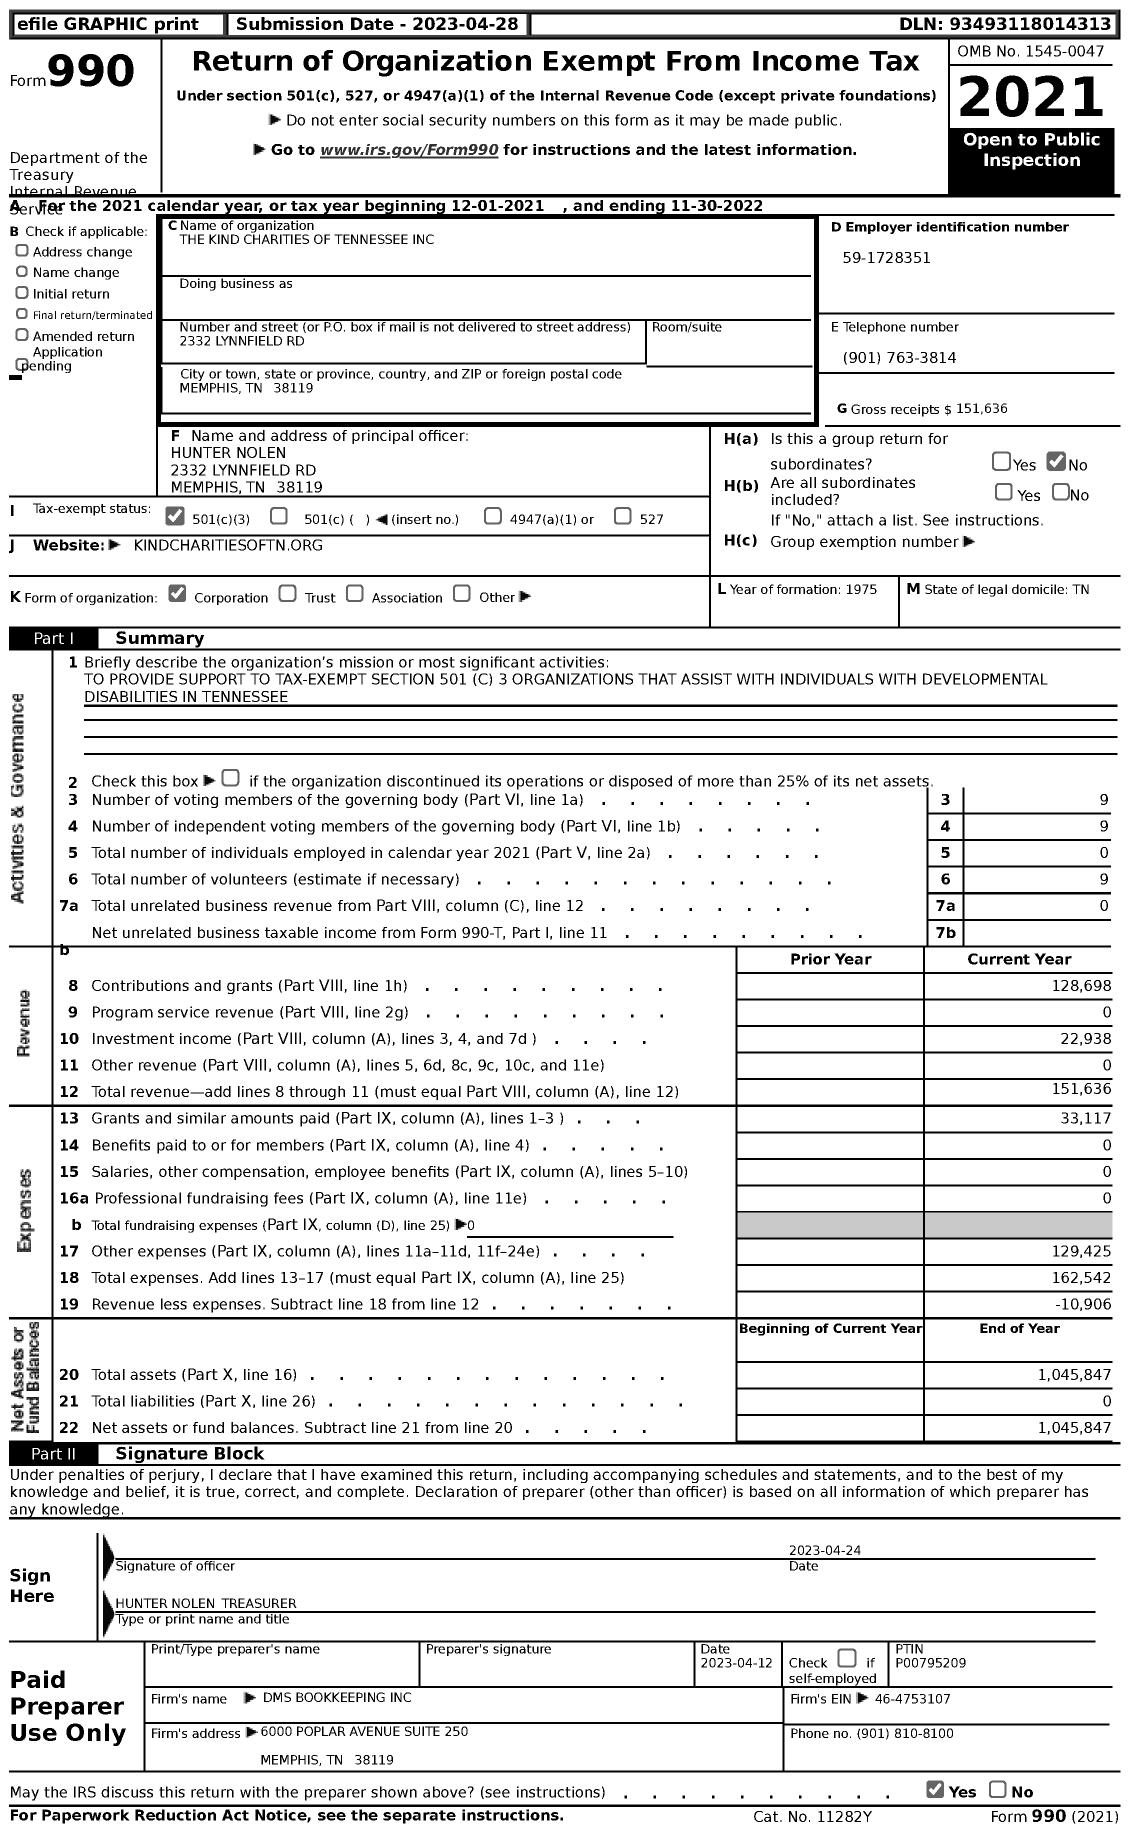 Image of first page of 2021 Form 990 for The Kind Charities of Tennessee